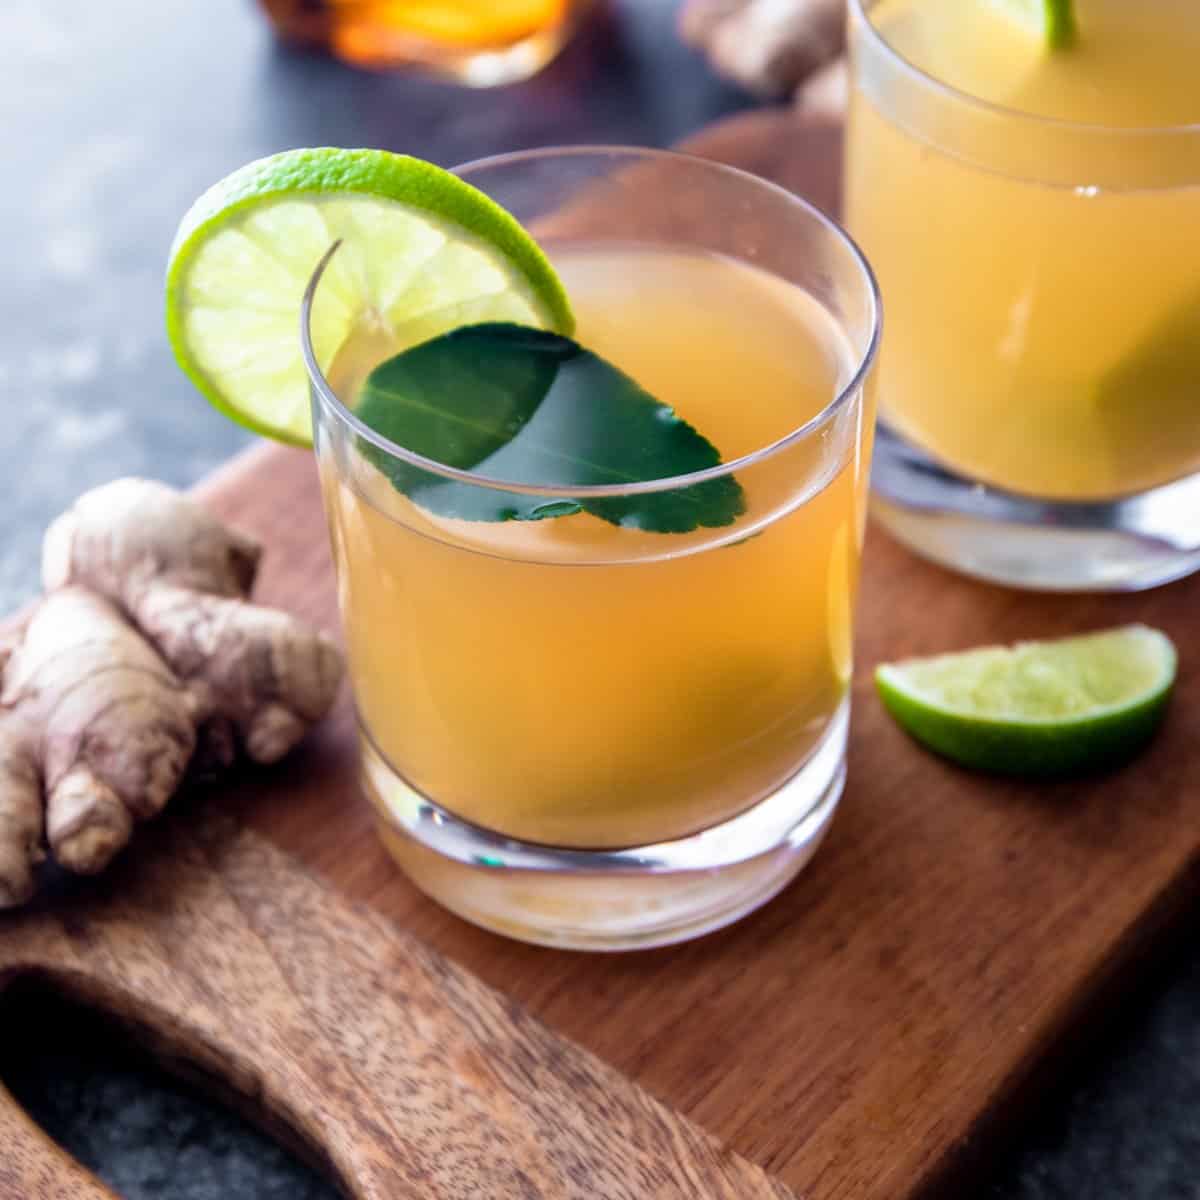 hot toddy in a clear glass with a lime slice on the rim